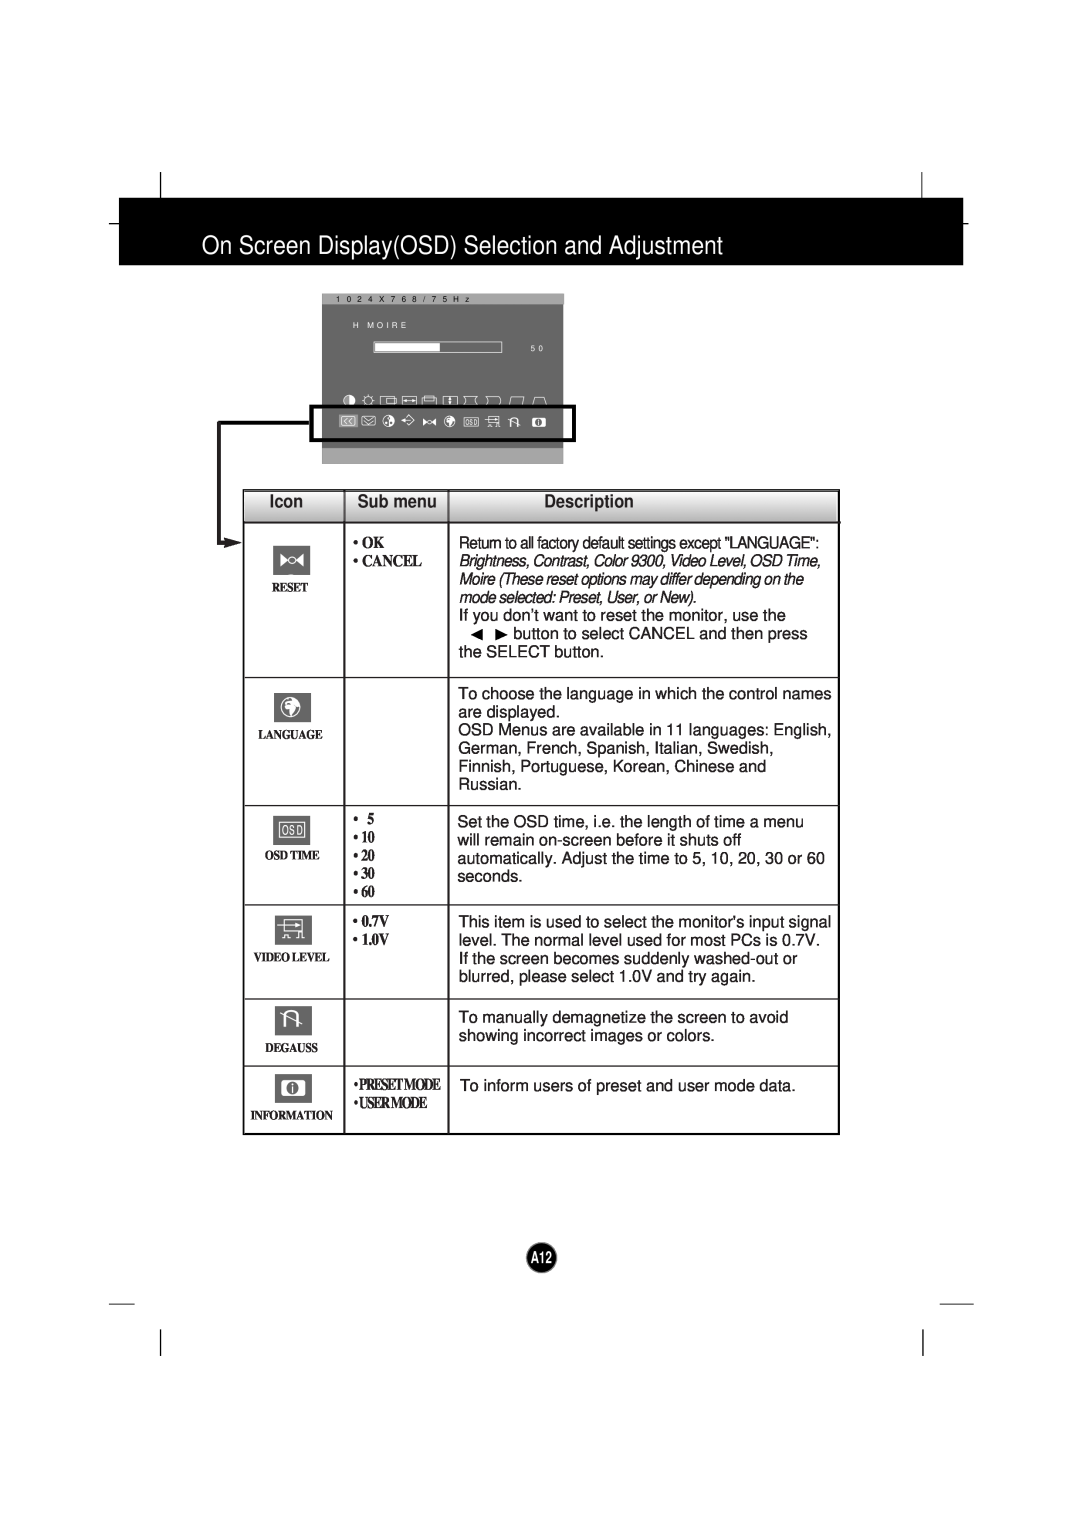 IBM 6633 - 4LE manual On Screen DisplayOSD Selection and Adjustment, Cancel, mode selected Preset, User, or New, 0.7V, 1.0V 